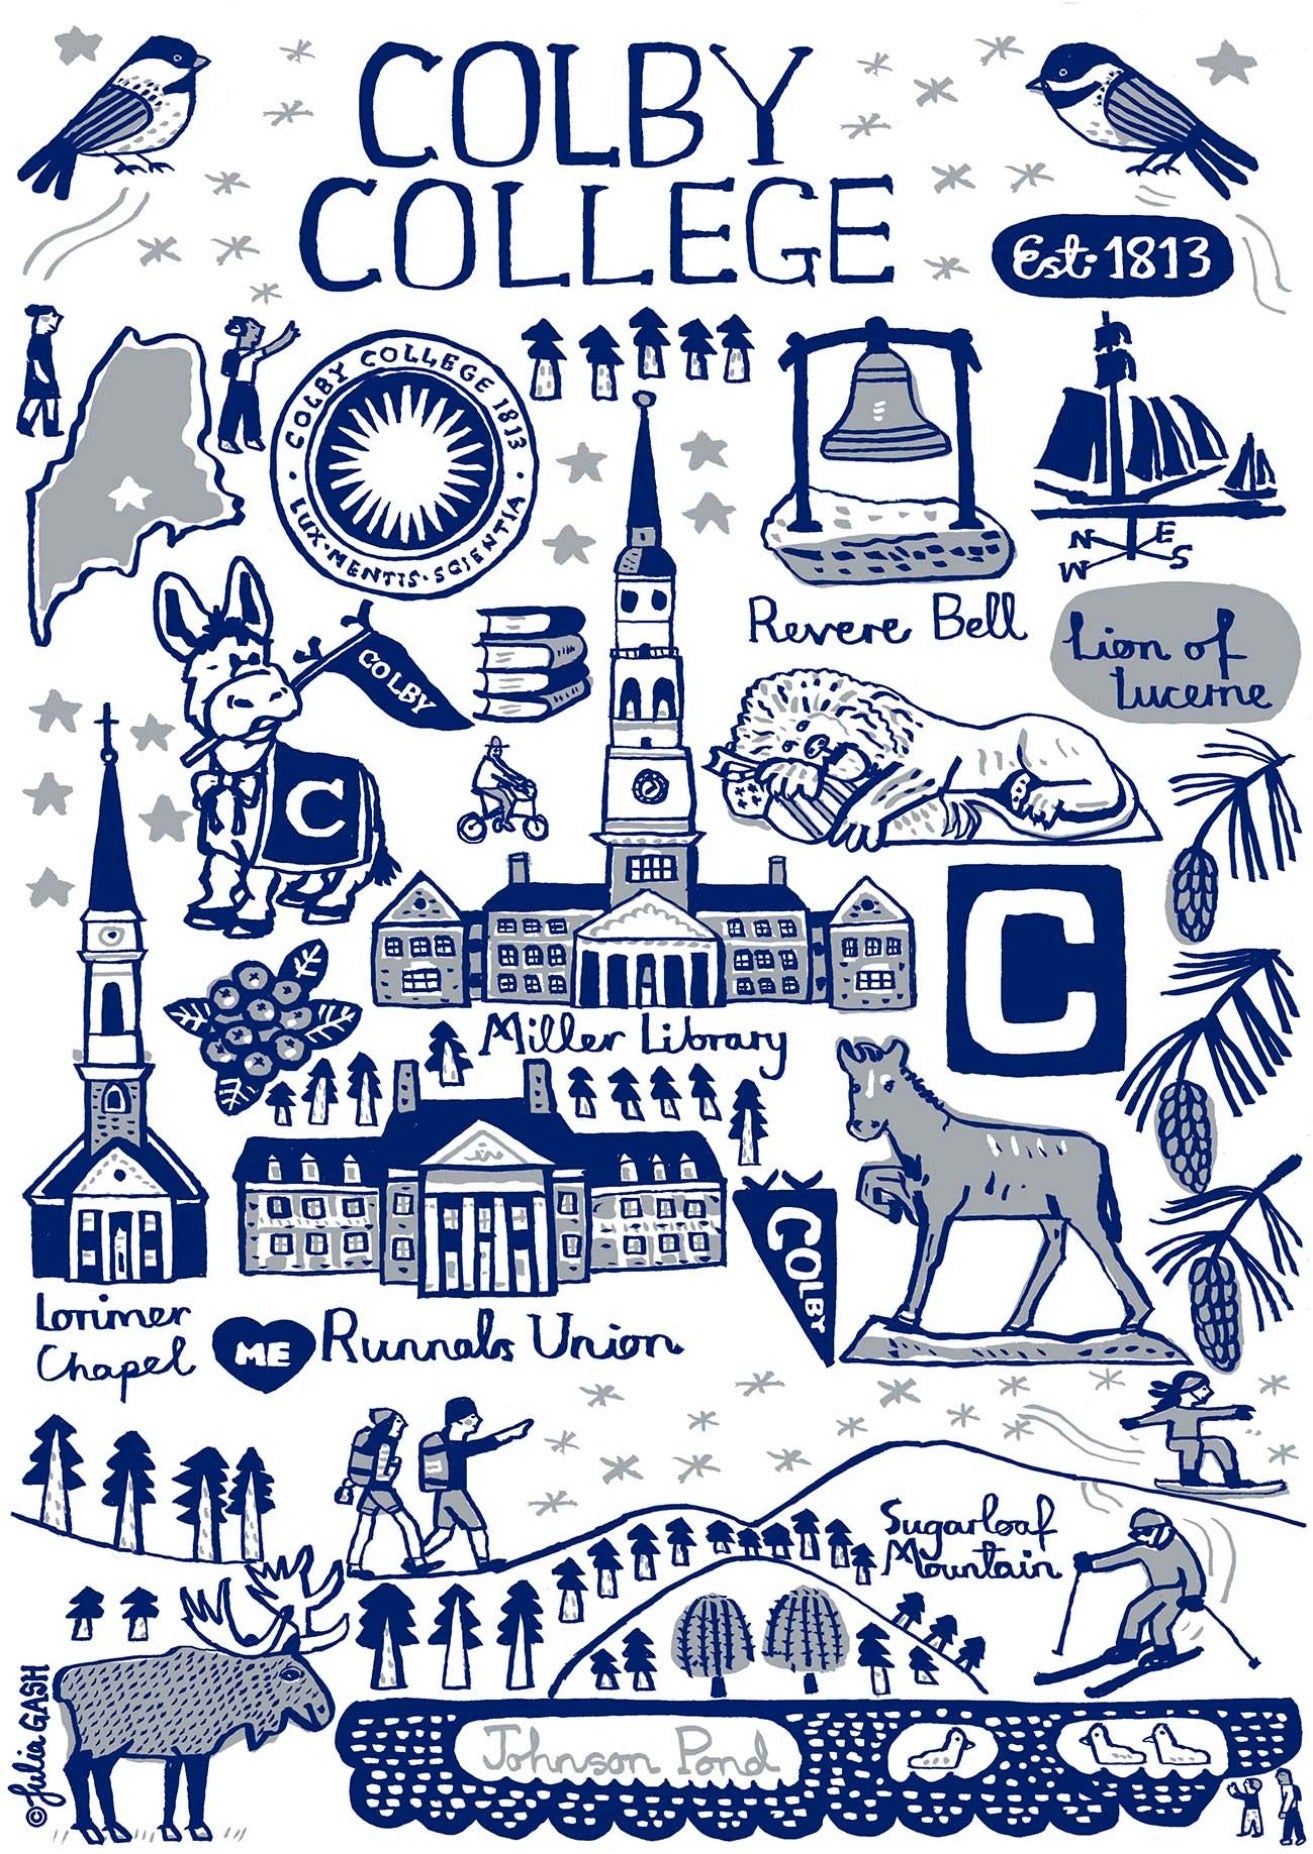 Colby College by Julia Gash